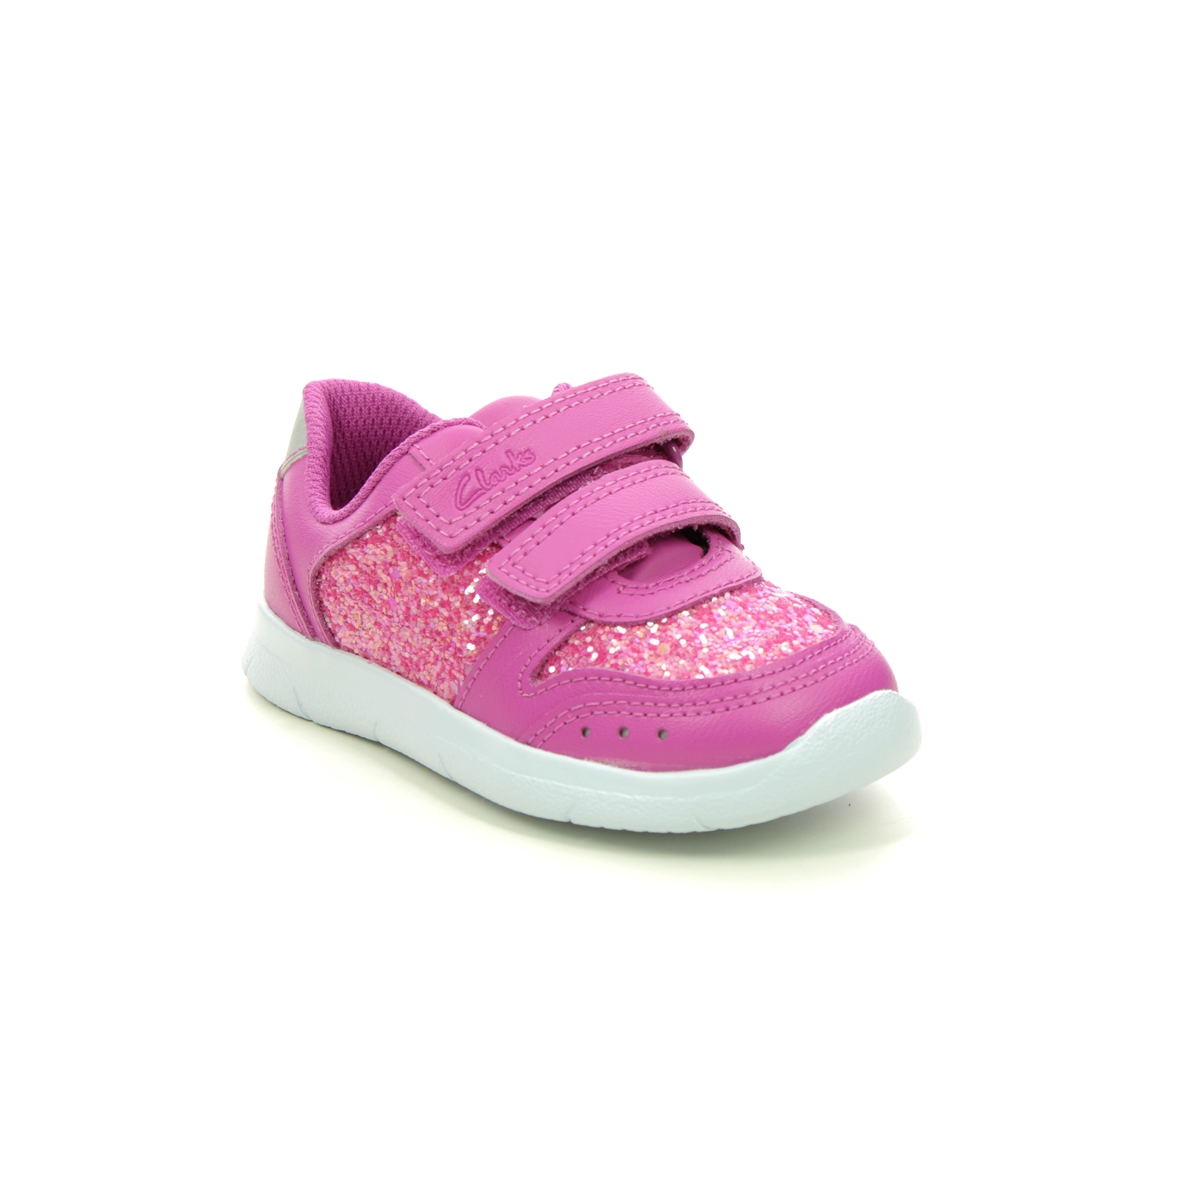 Clarks Ath Sonar T Hot Pink Kids Toddler Girls Trainers 637916F In Size 9.5 In Plain Hot Pink F Width Fitting Regular Fit